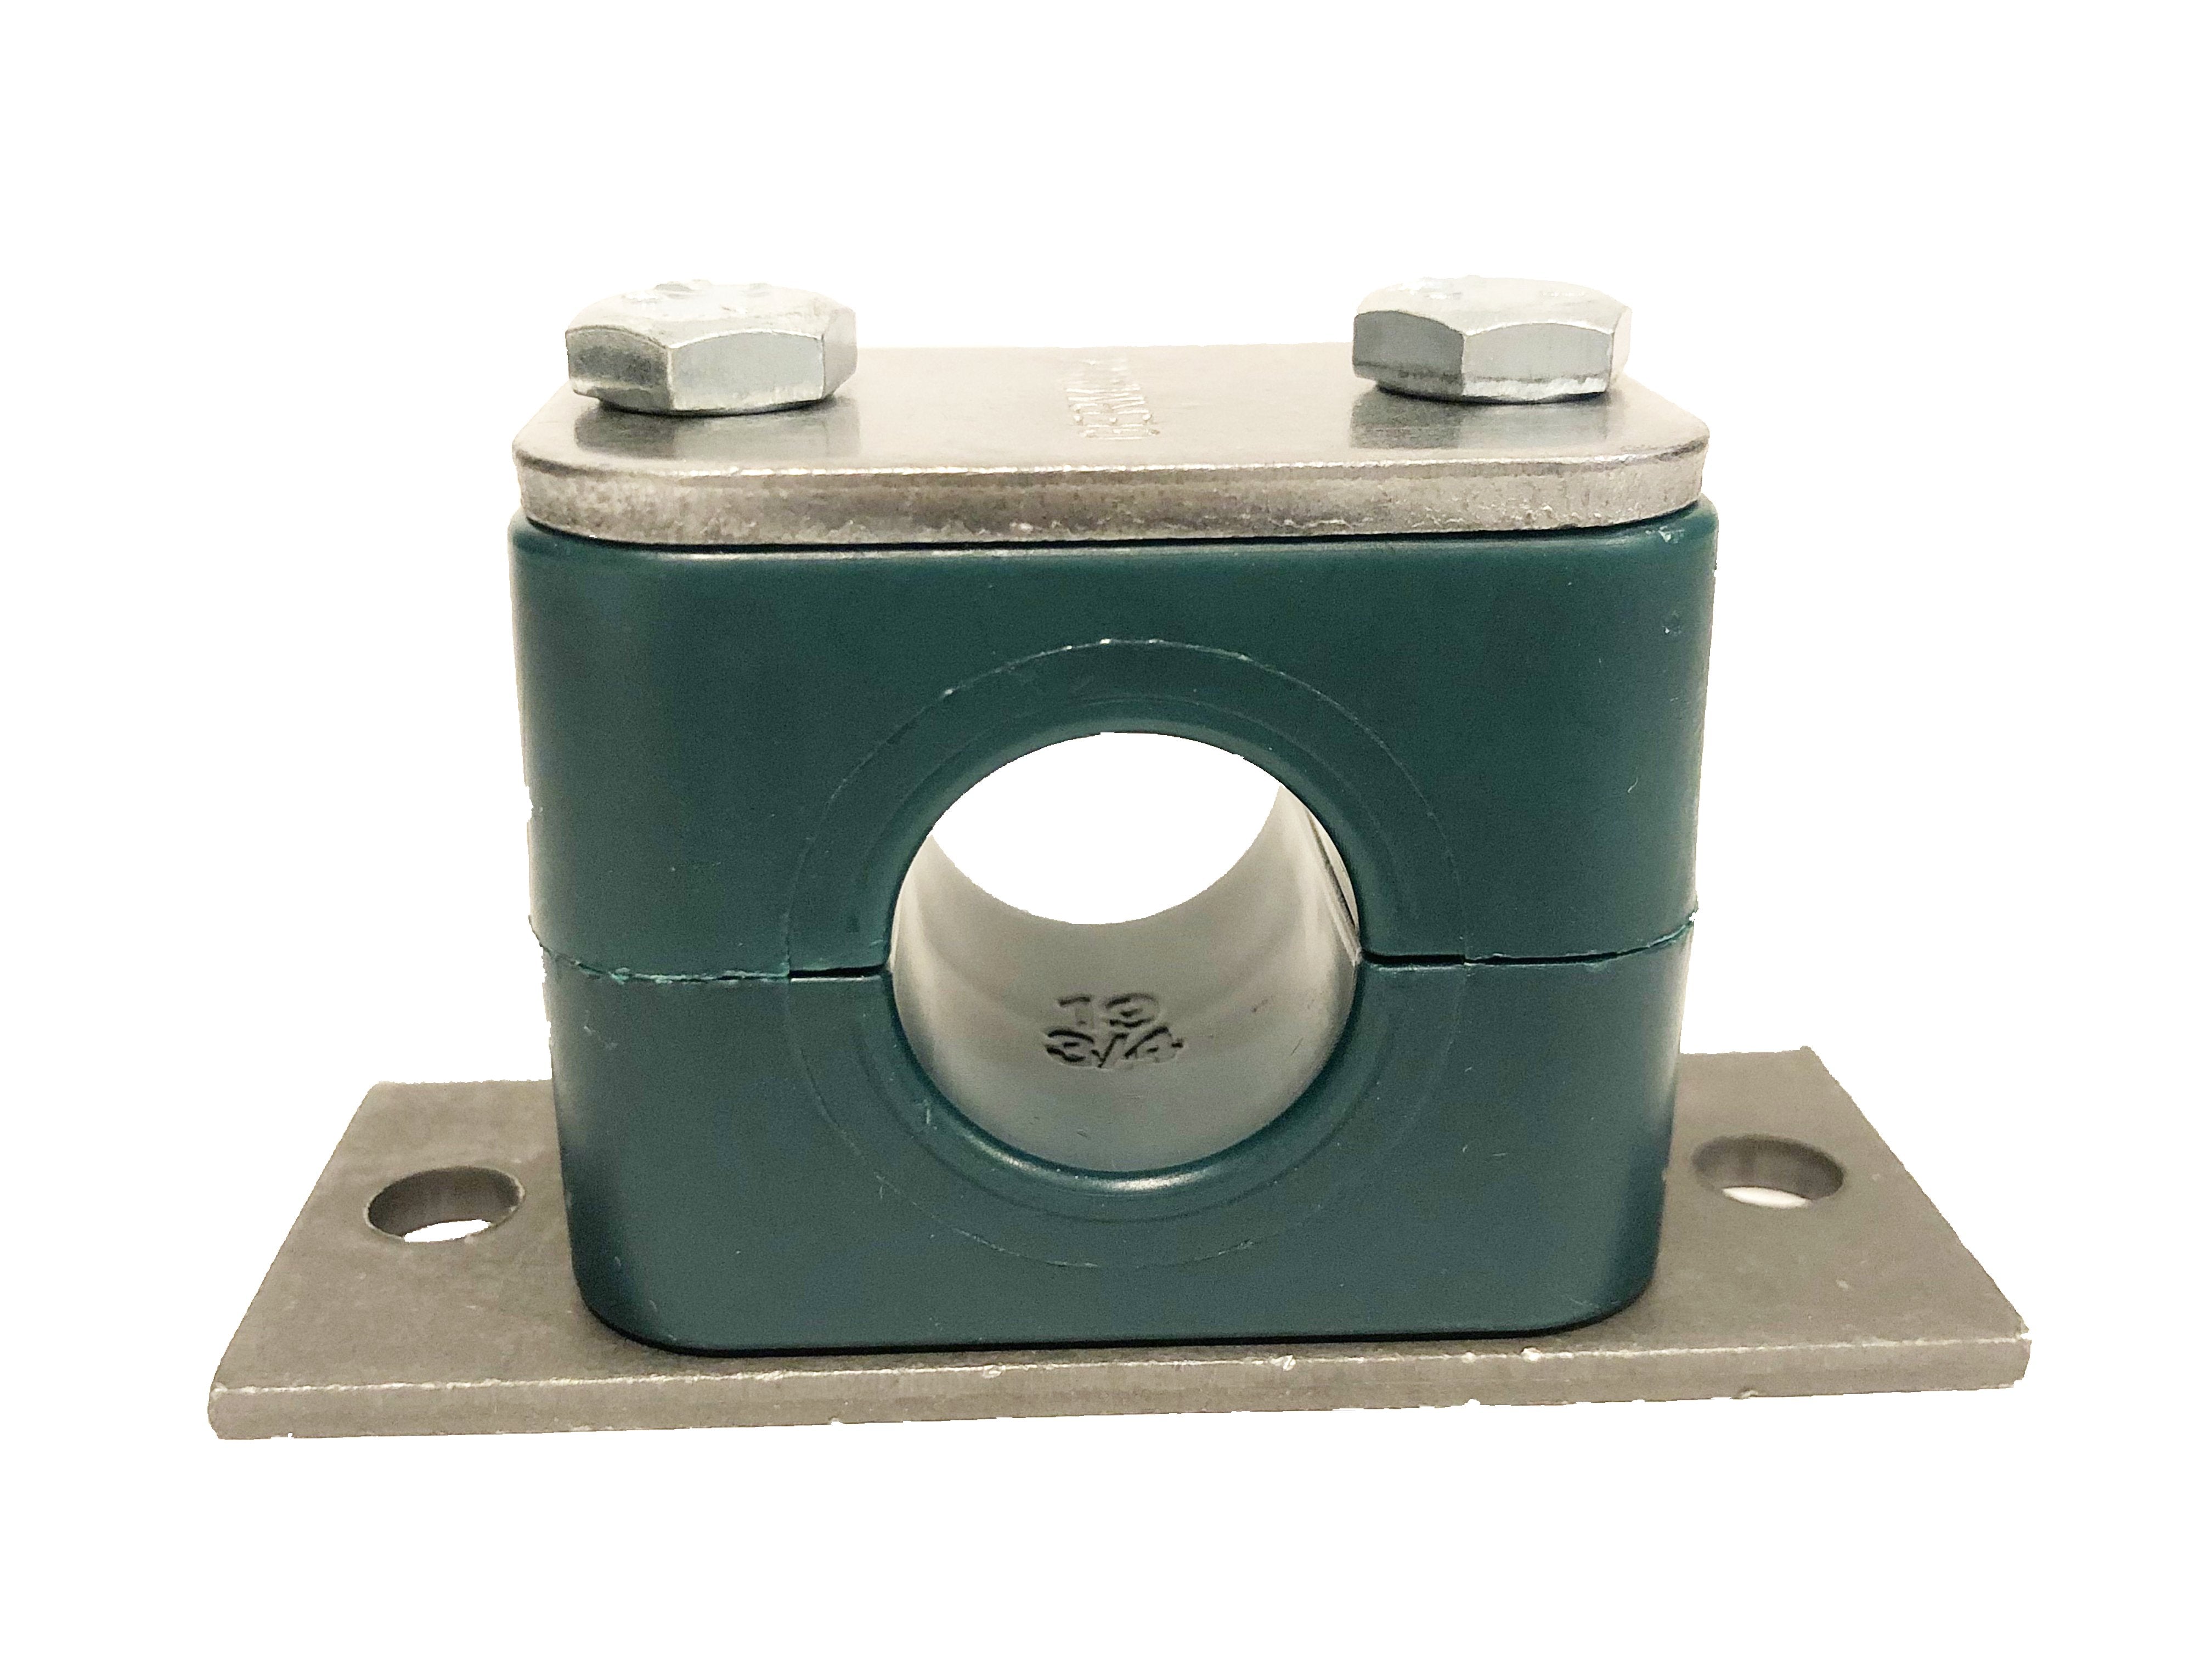 SPV-648.3-PP-H-DP-AS-U-W5 : Stauff Clamp, Elongated Weld Plate, 1.9" (48.3mm) OD, for 1.5" Pipe, Green PP Insert, Smooth Interior, 316SS